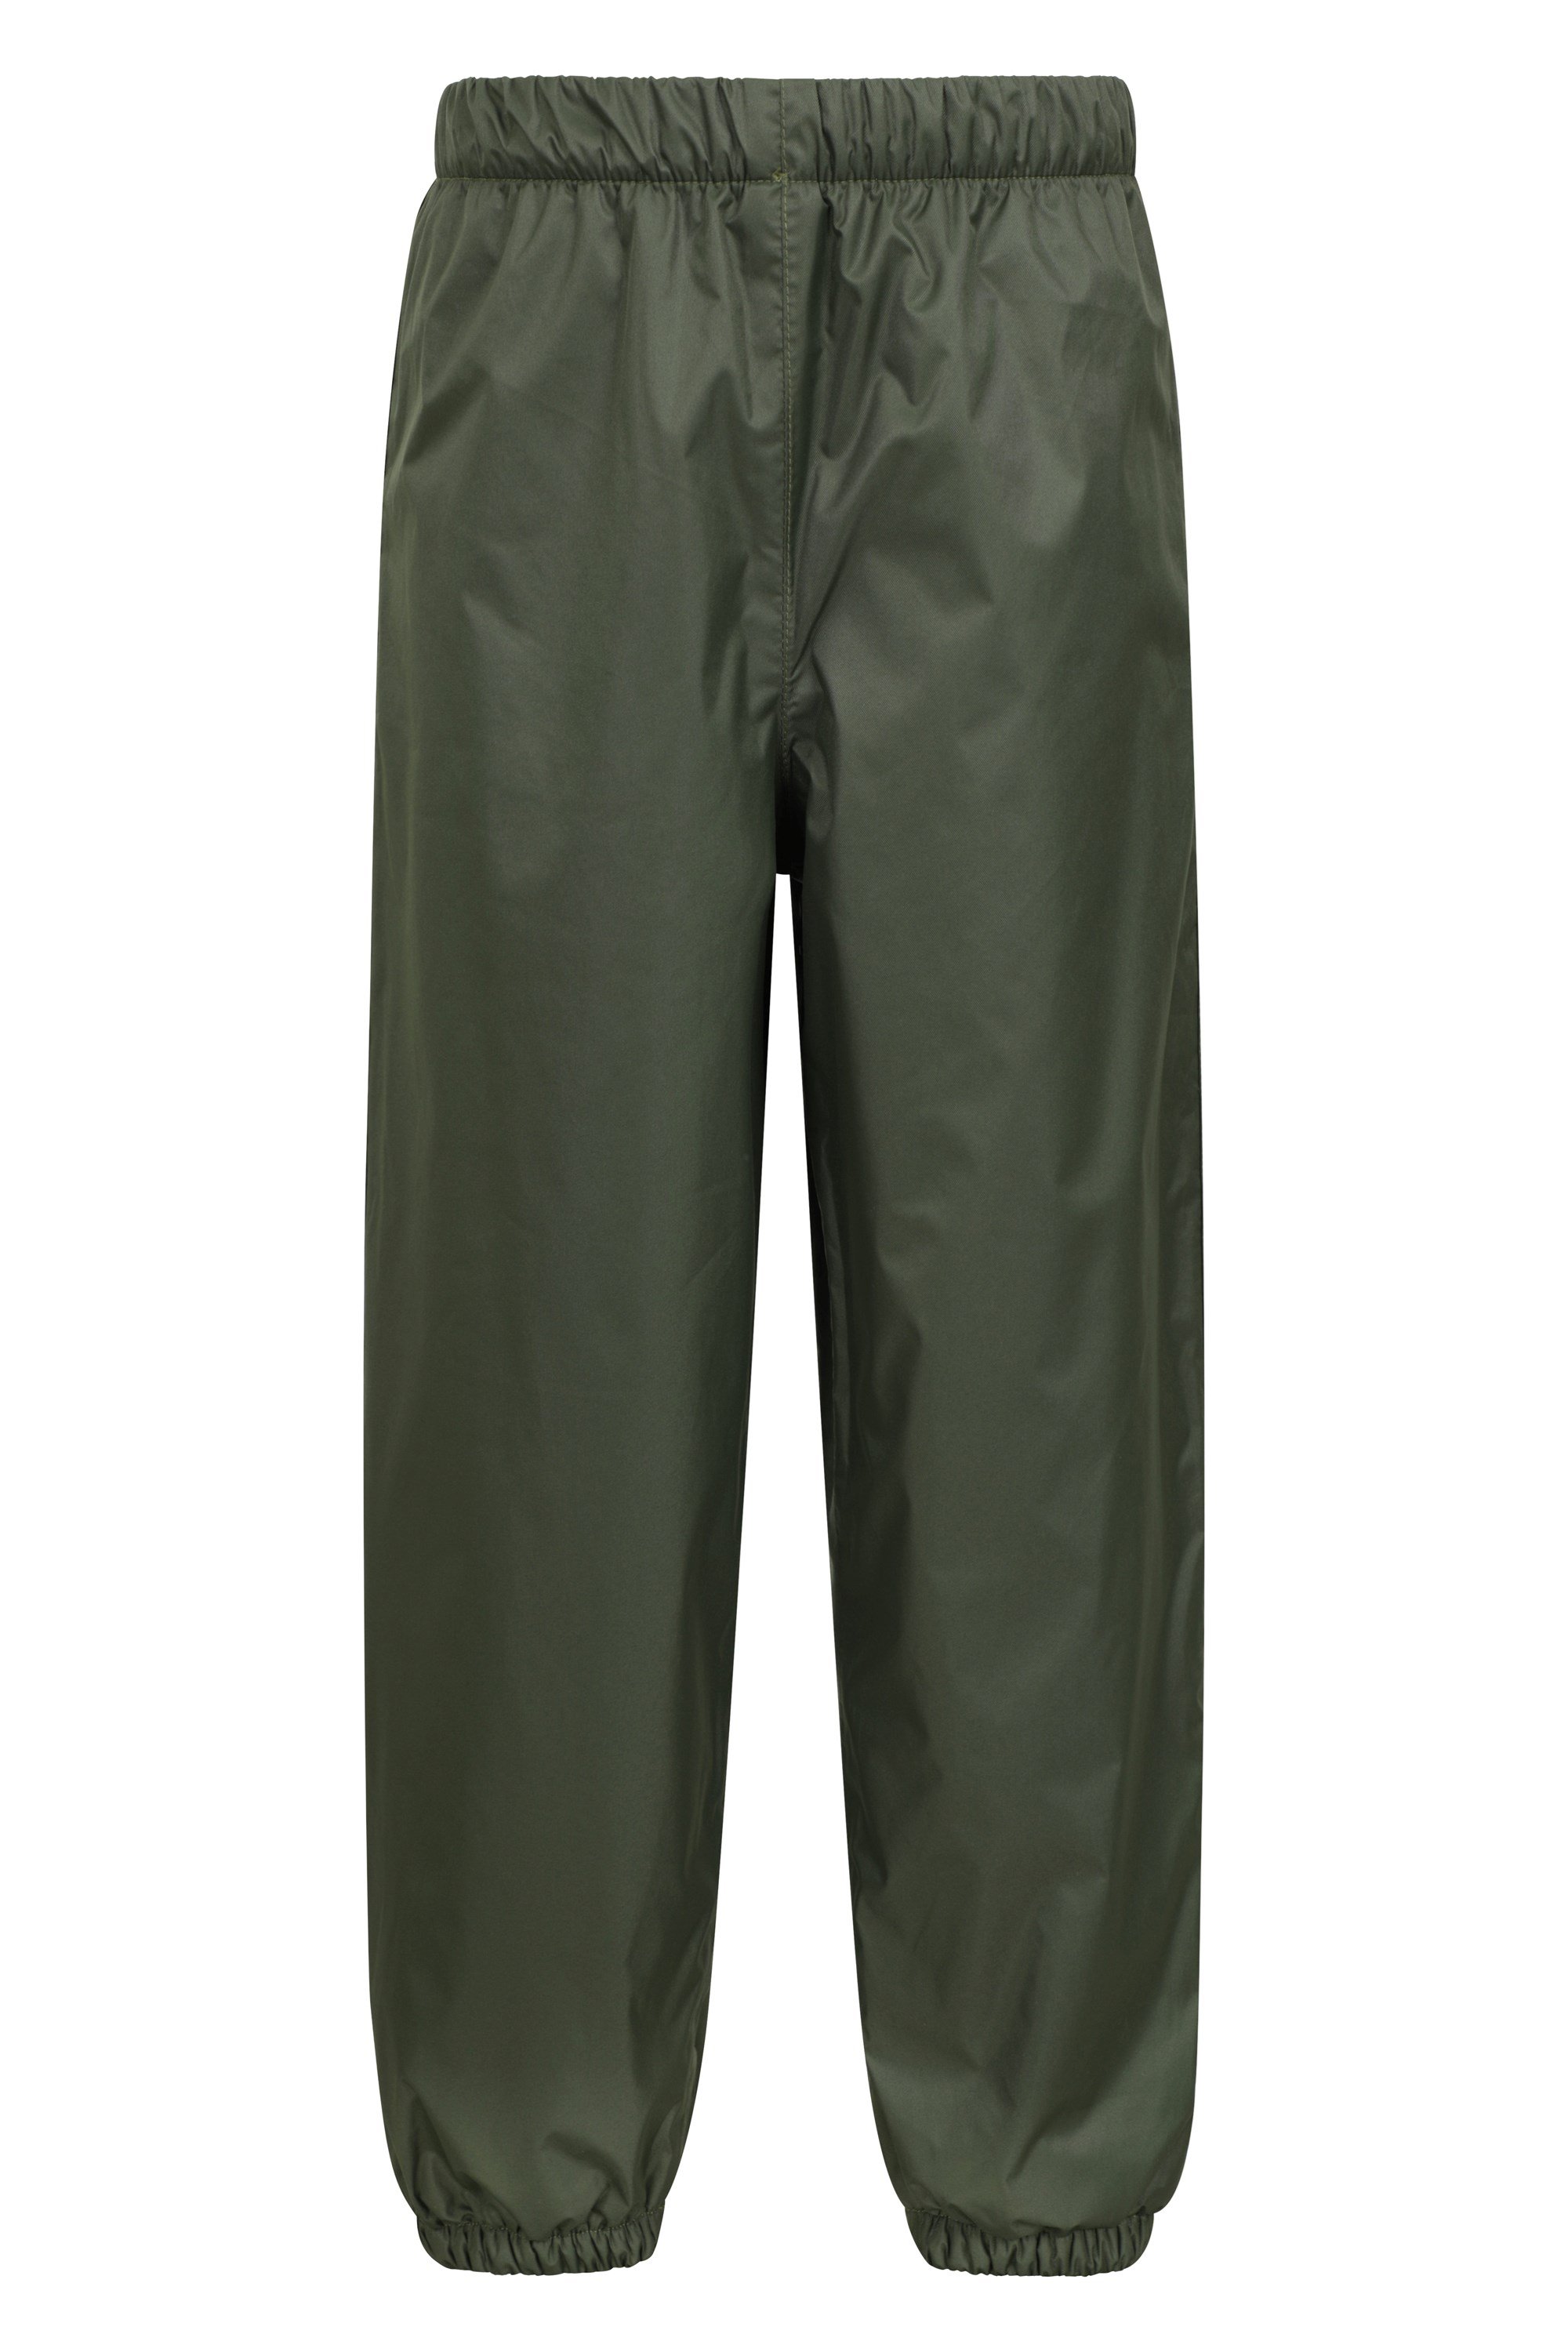 Buy Mountain Warehouse Black Convertible Walking Trousers from Next India